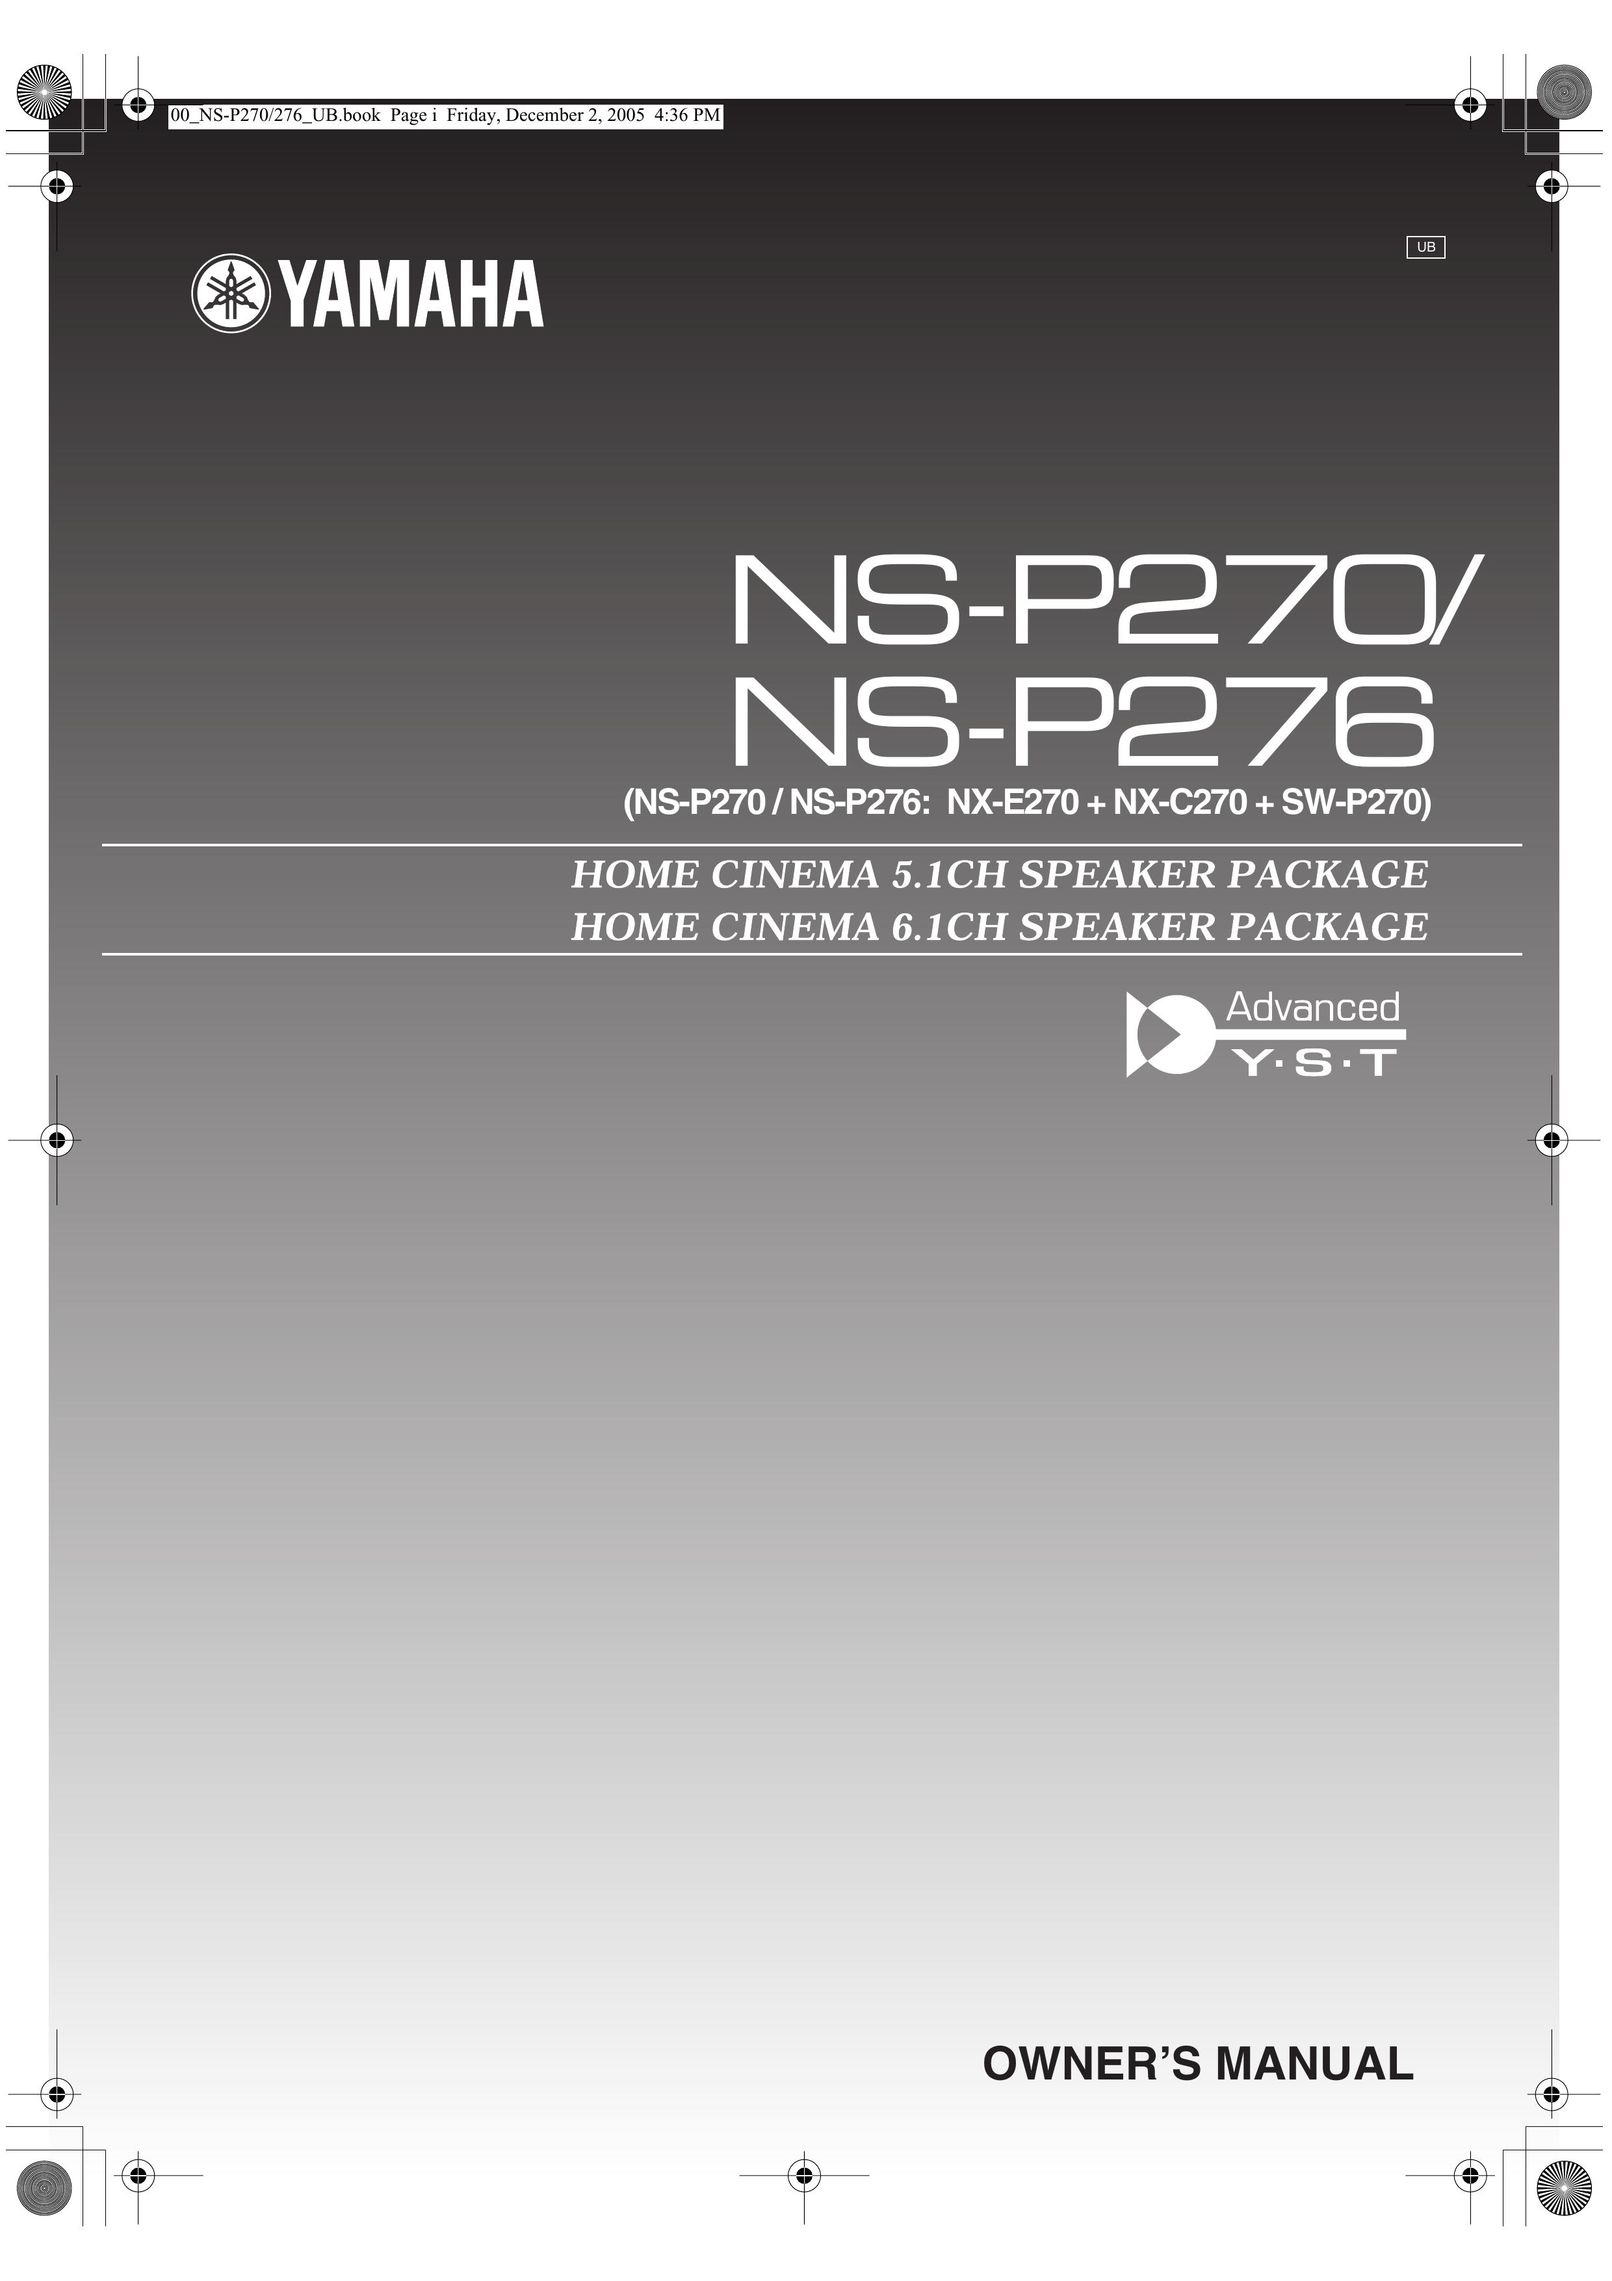 Yamaha NS-P270 Home Theater System User Manual